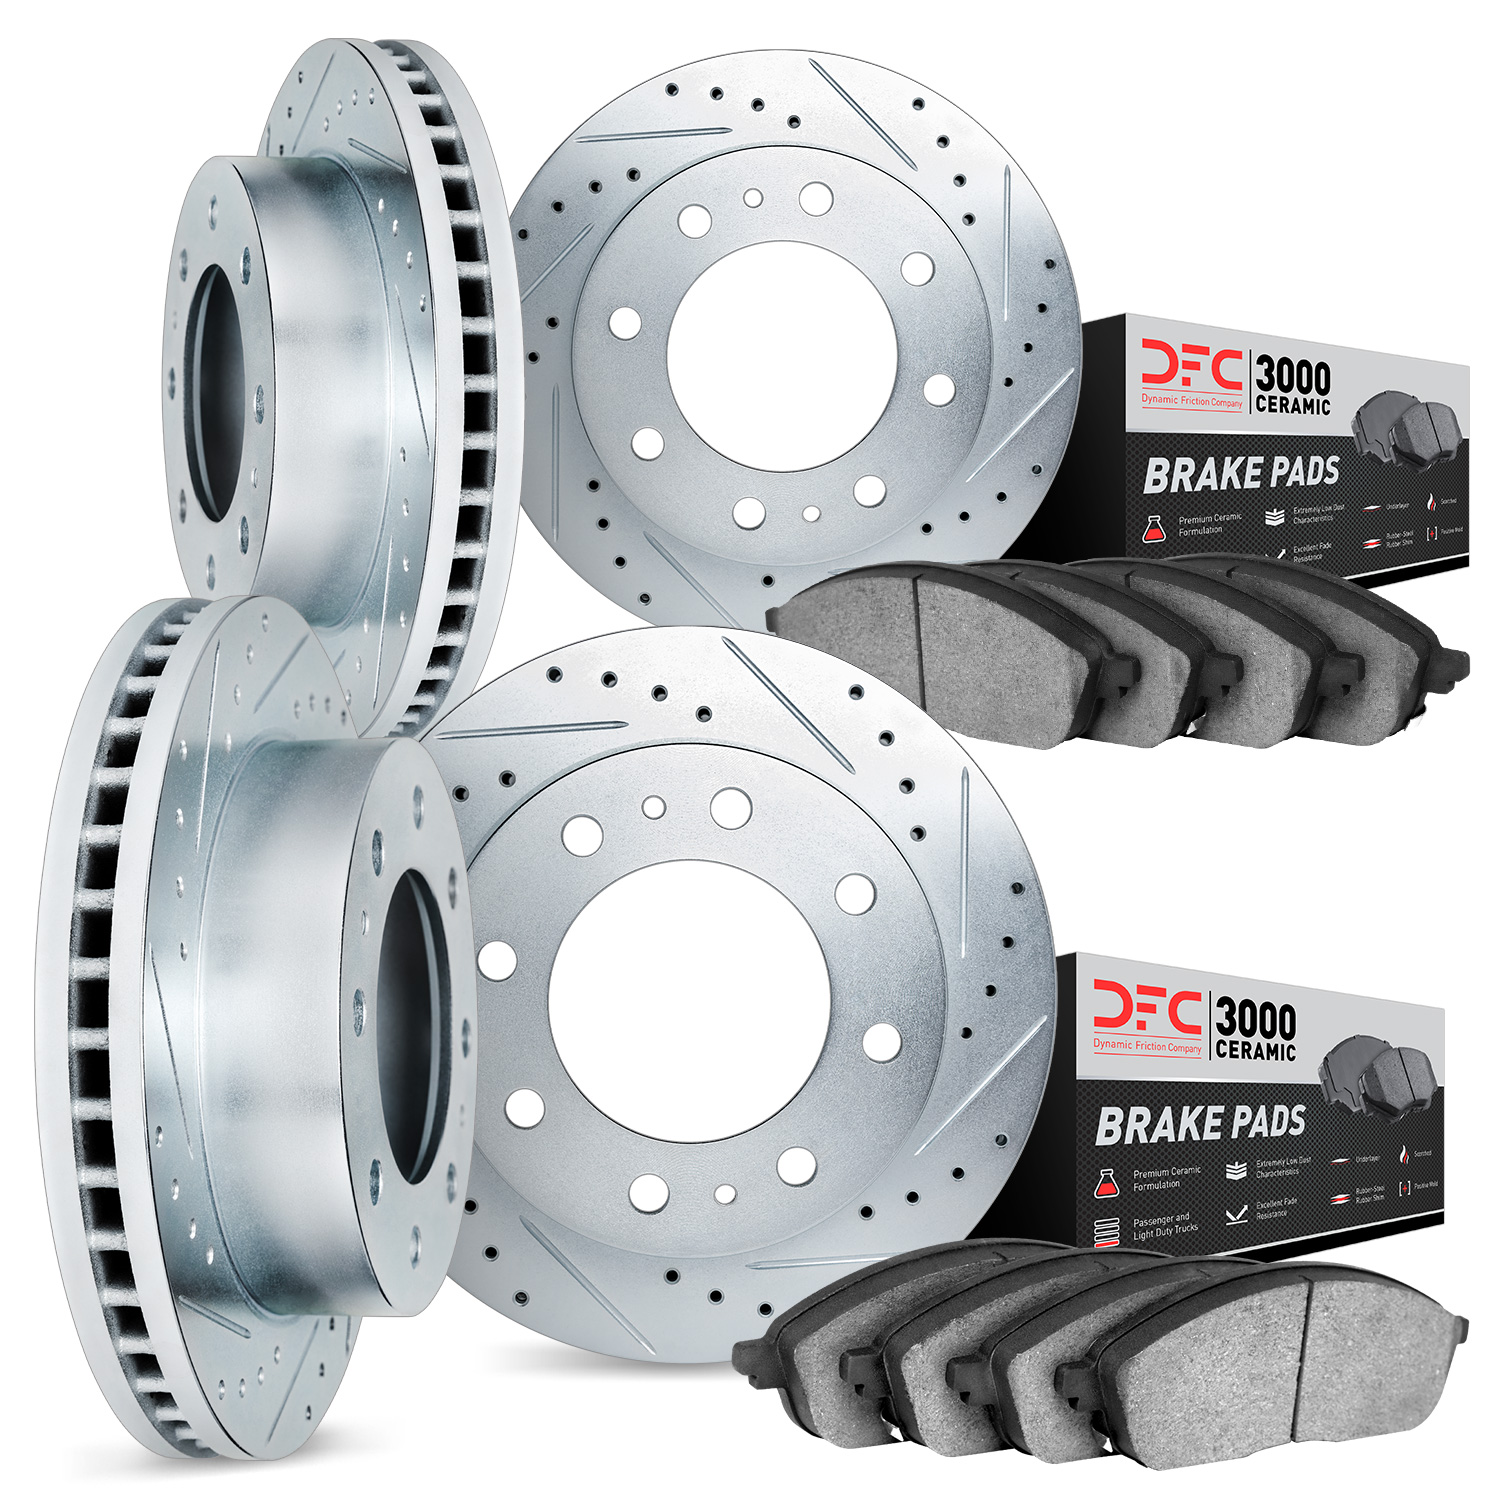 7304-54039 Drilled/Slotted Brake Rotor with 3000-Series Ceramic Brake Pads Kit [Silver], 1999-1999 Ford/Lincoln/Mercury/Mazda, P